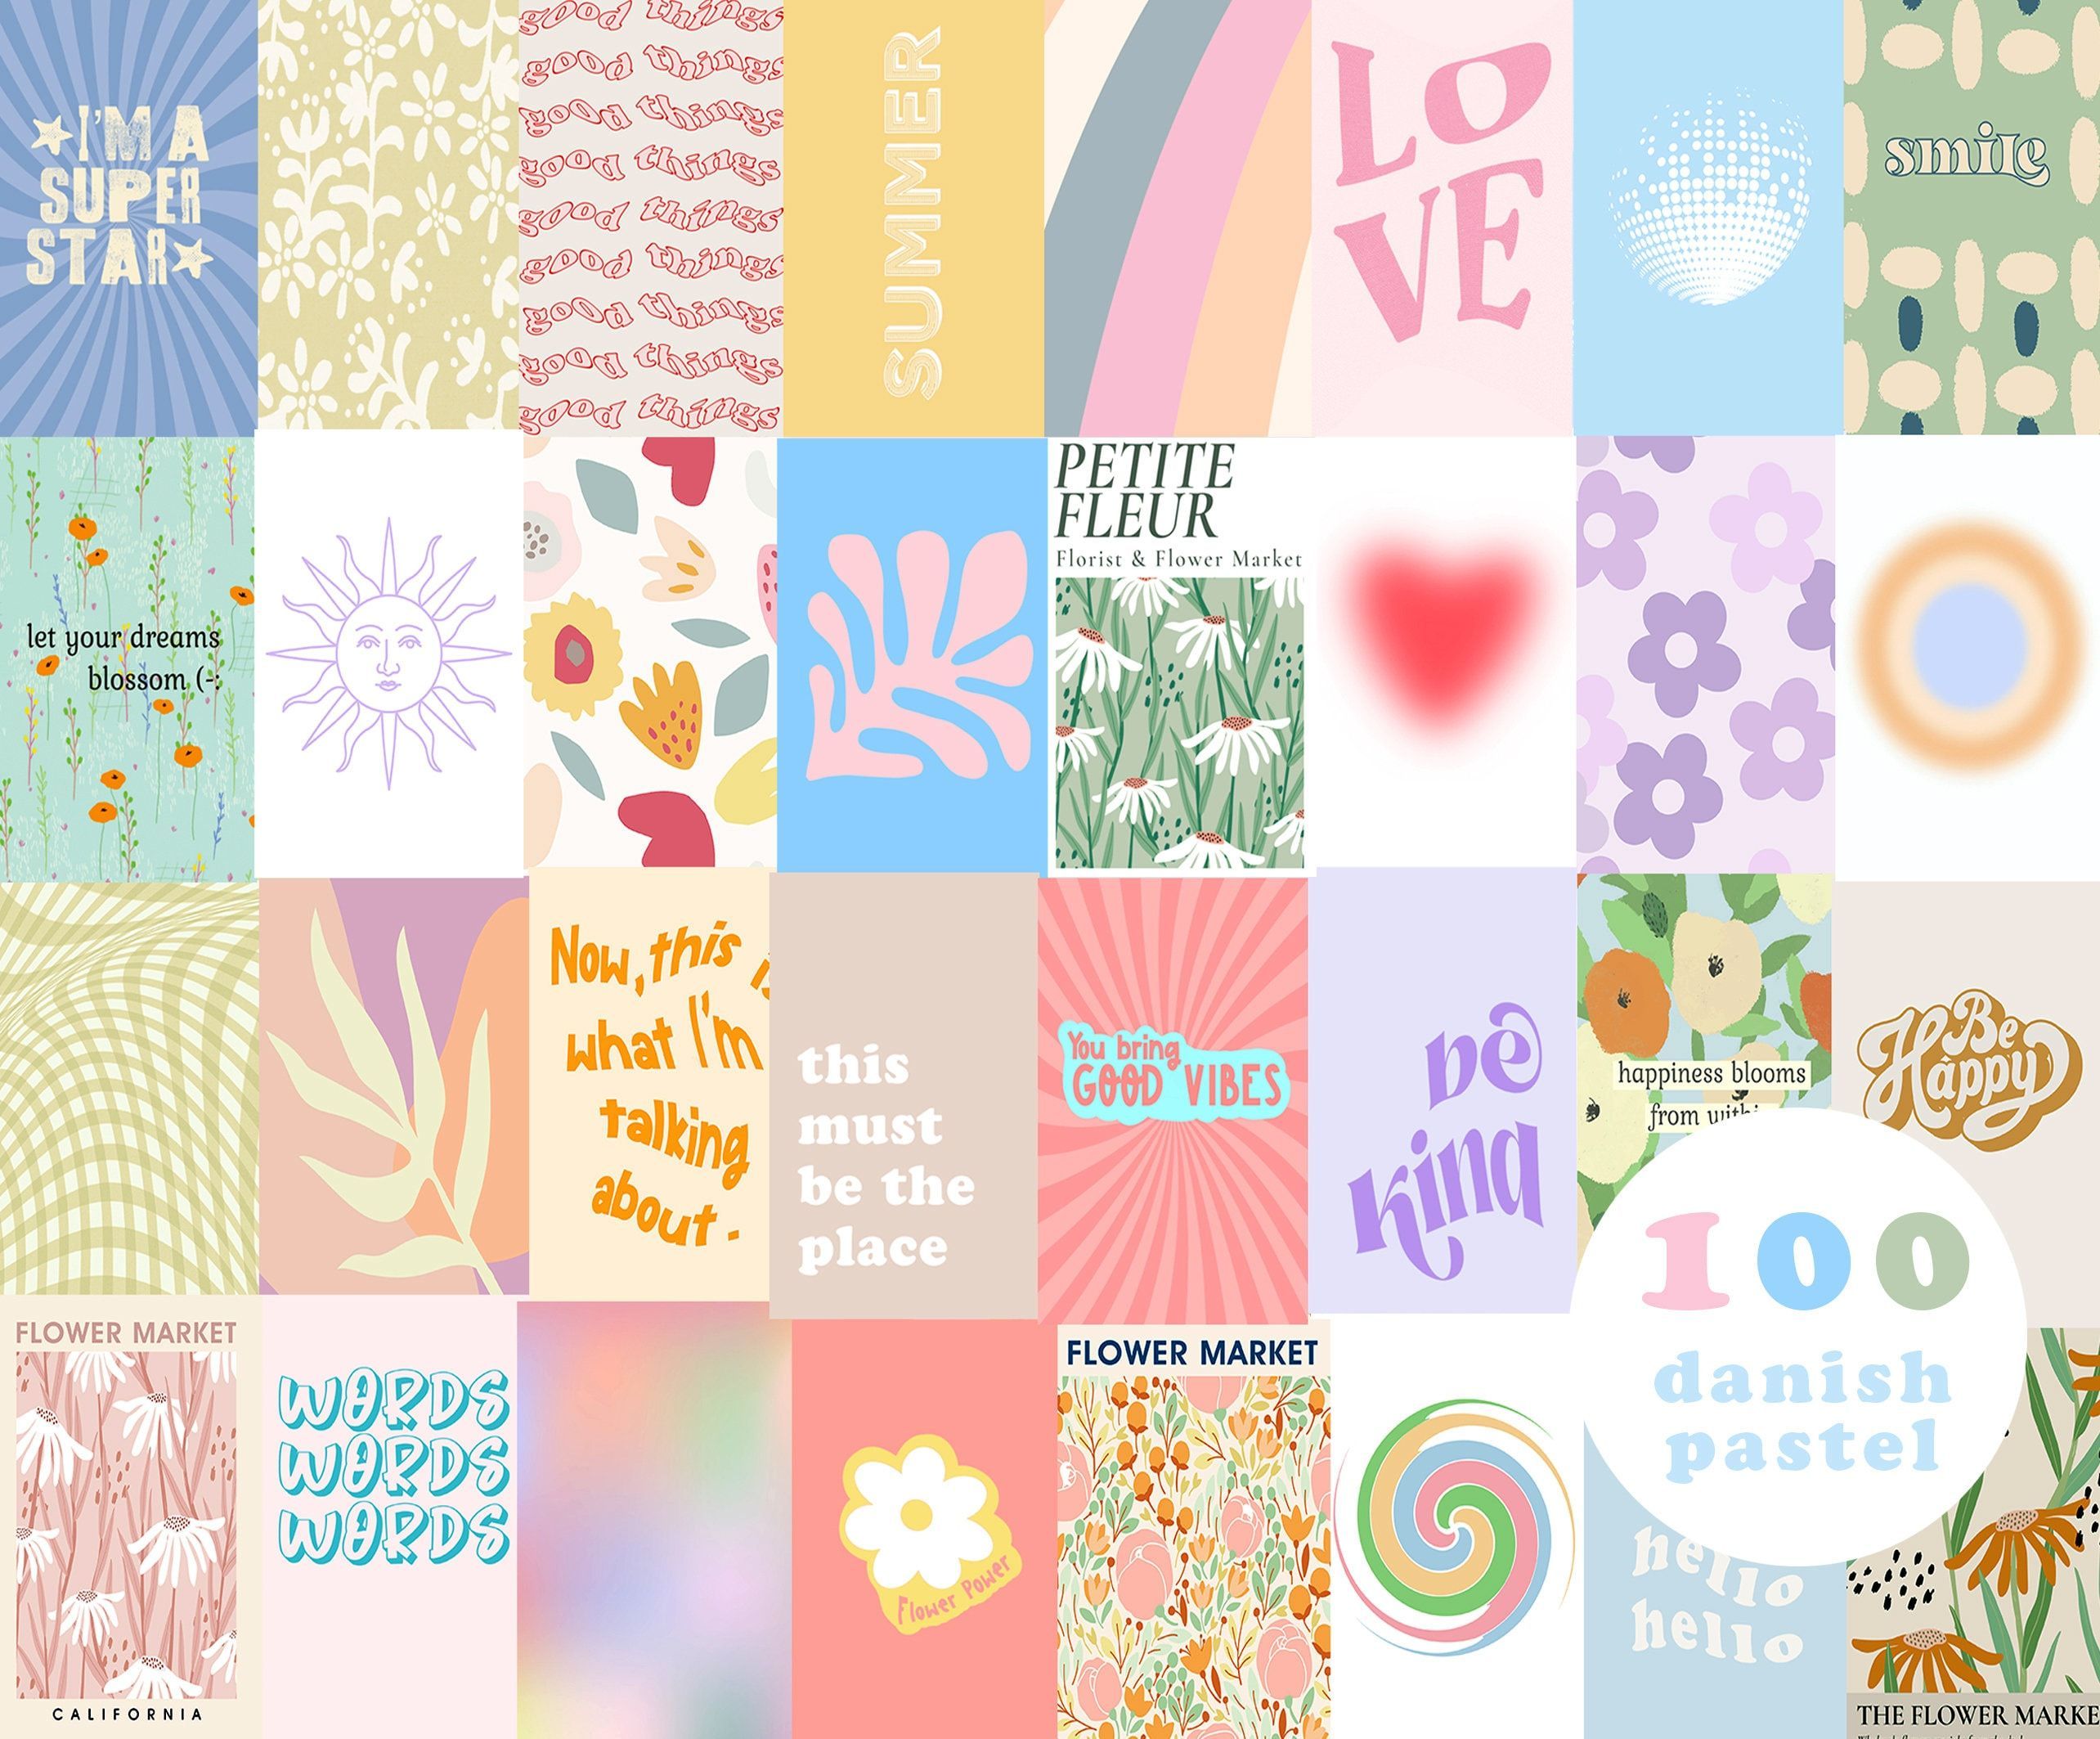 A collage of pastel colored images with flower patterns and words such as love, kindness, and happiness. - Danish